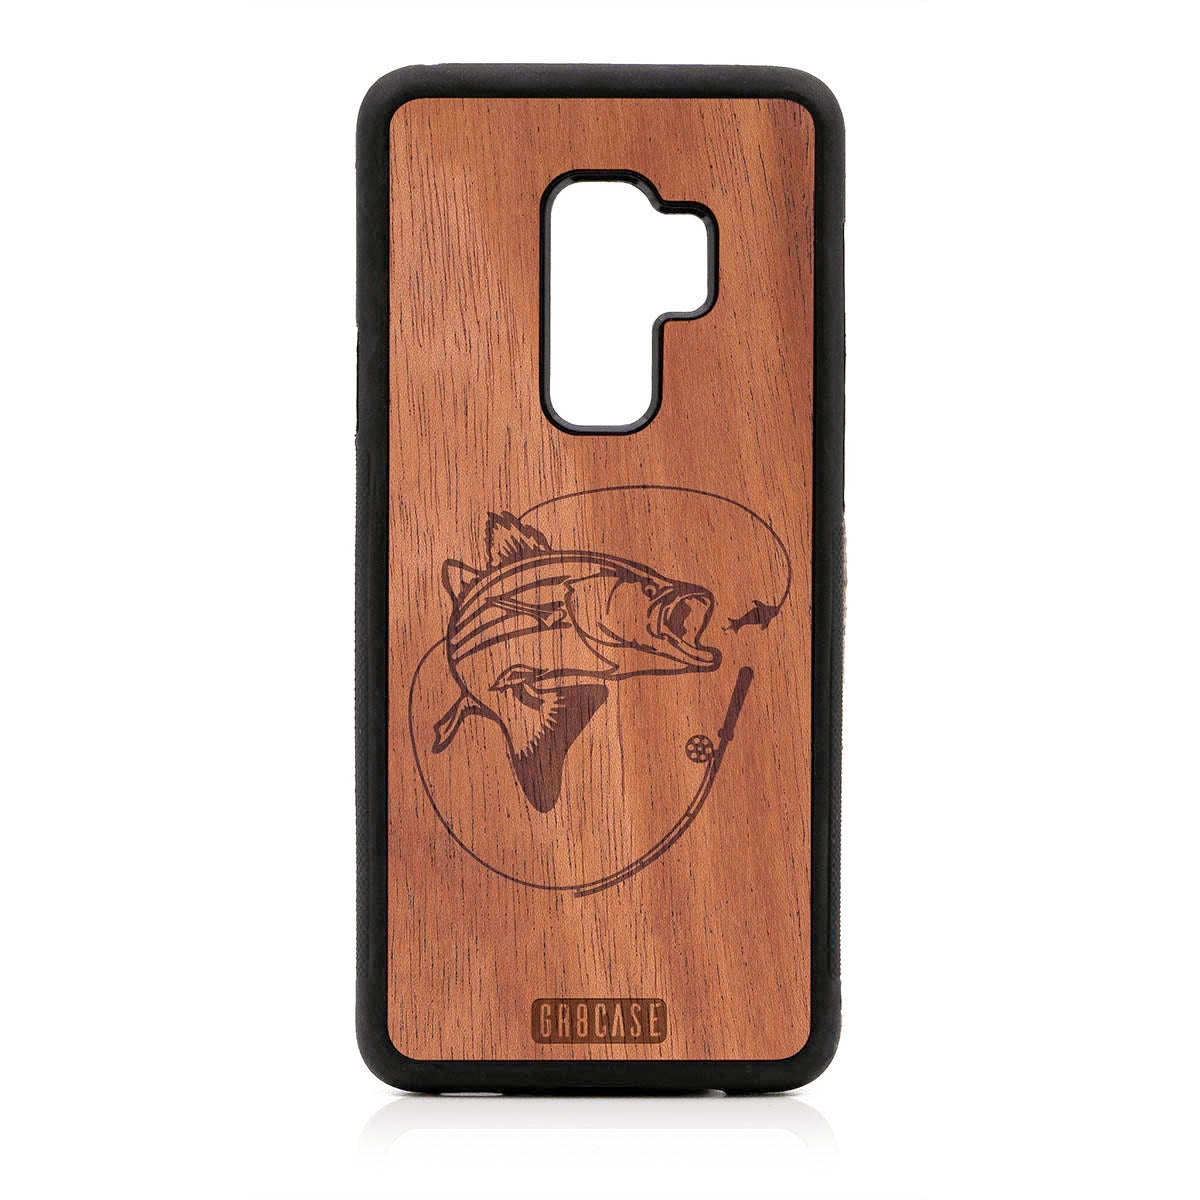 Fish and Reel Design Wood Case For Samsung Galaxy S9 Plus by GR8CASE